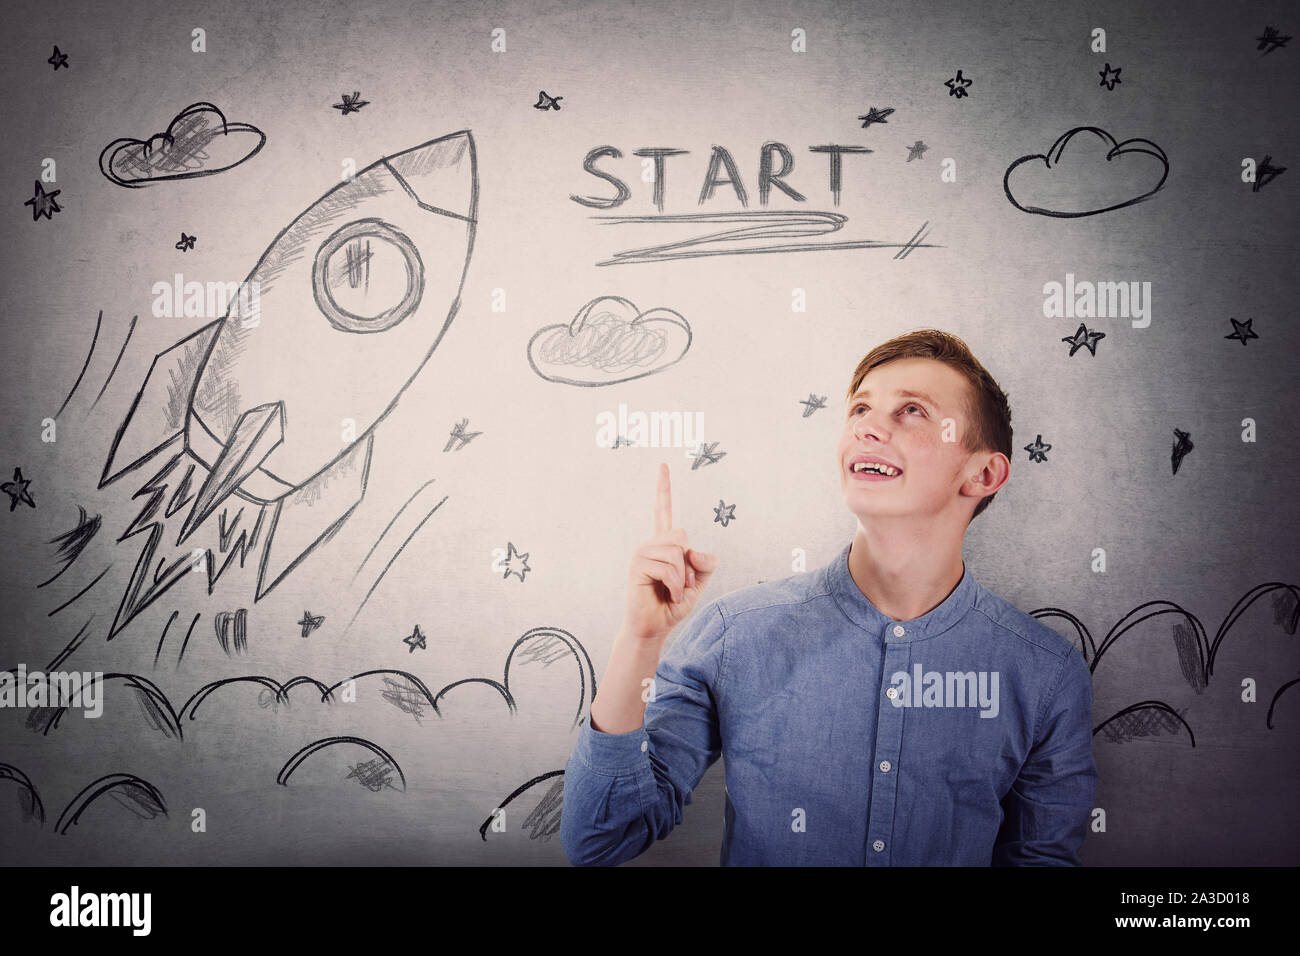 Joyful student guy pointing finger and looking up, happy face expression, showing rocket ship startup sketch, taking off in space. Stock Photo